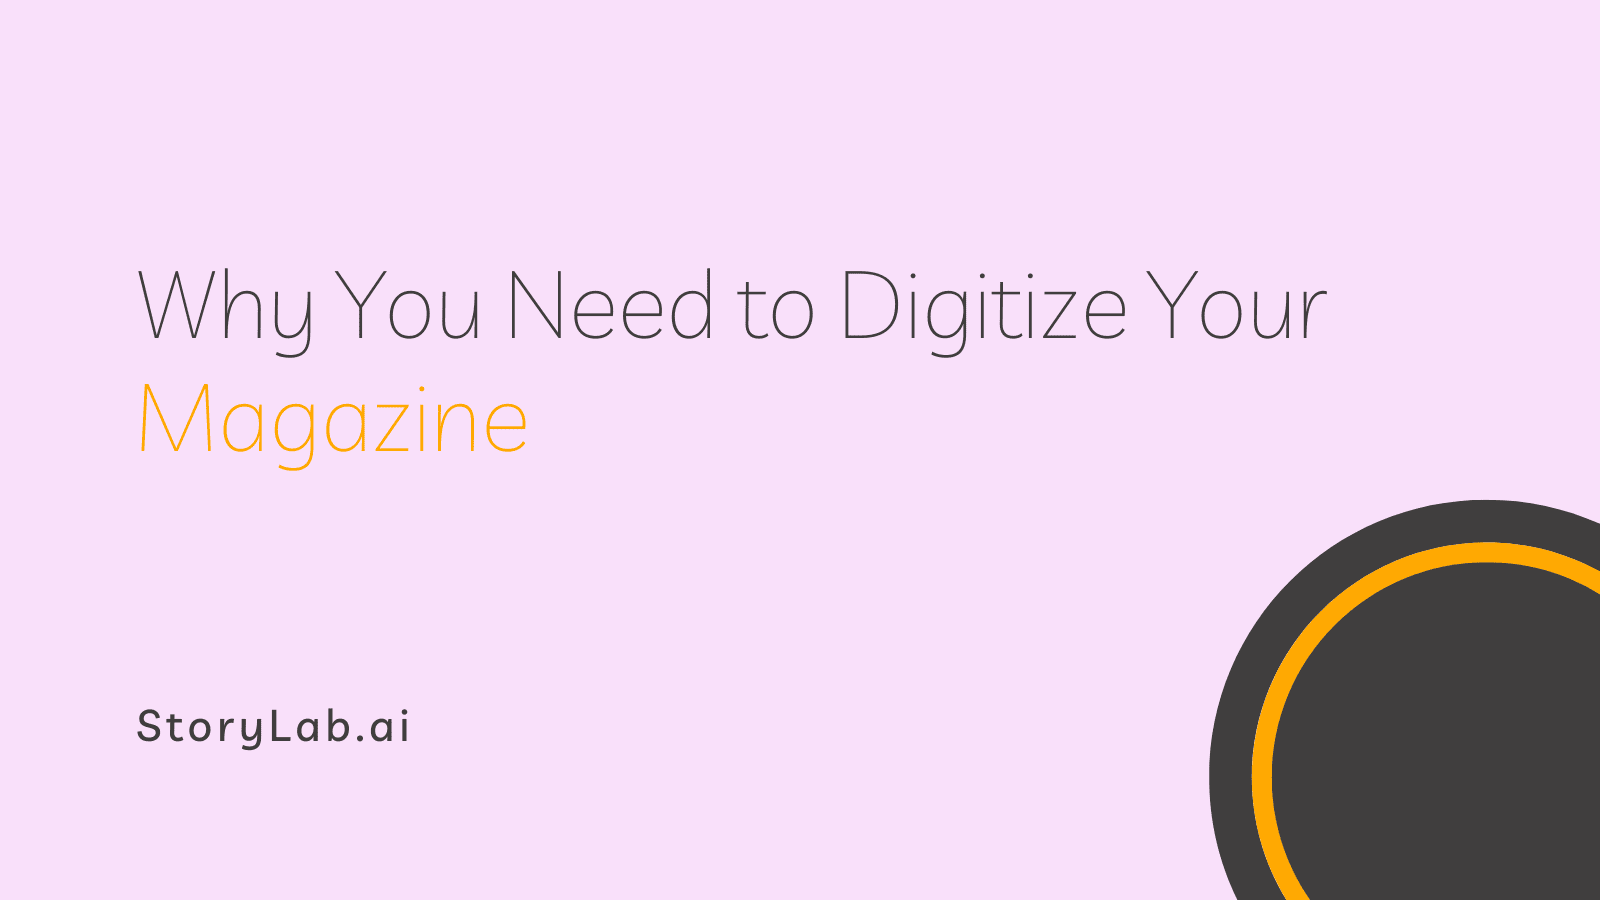 Why You Need to Digitize Your Magazine